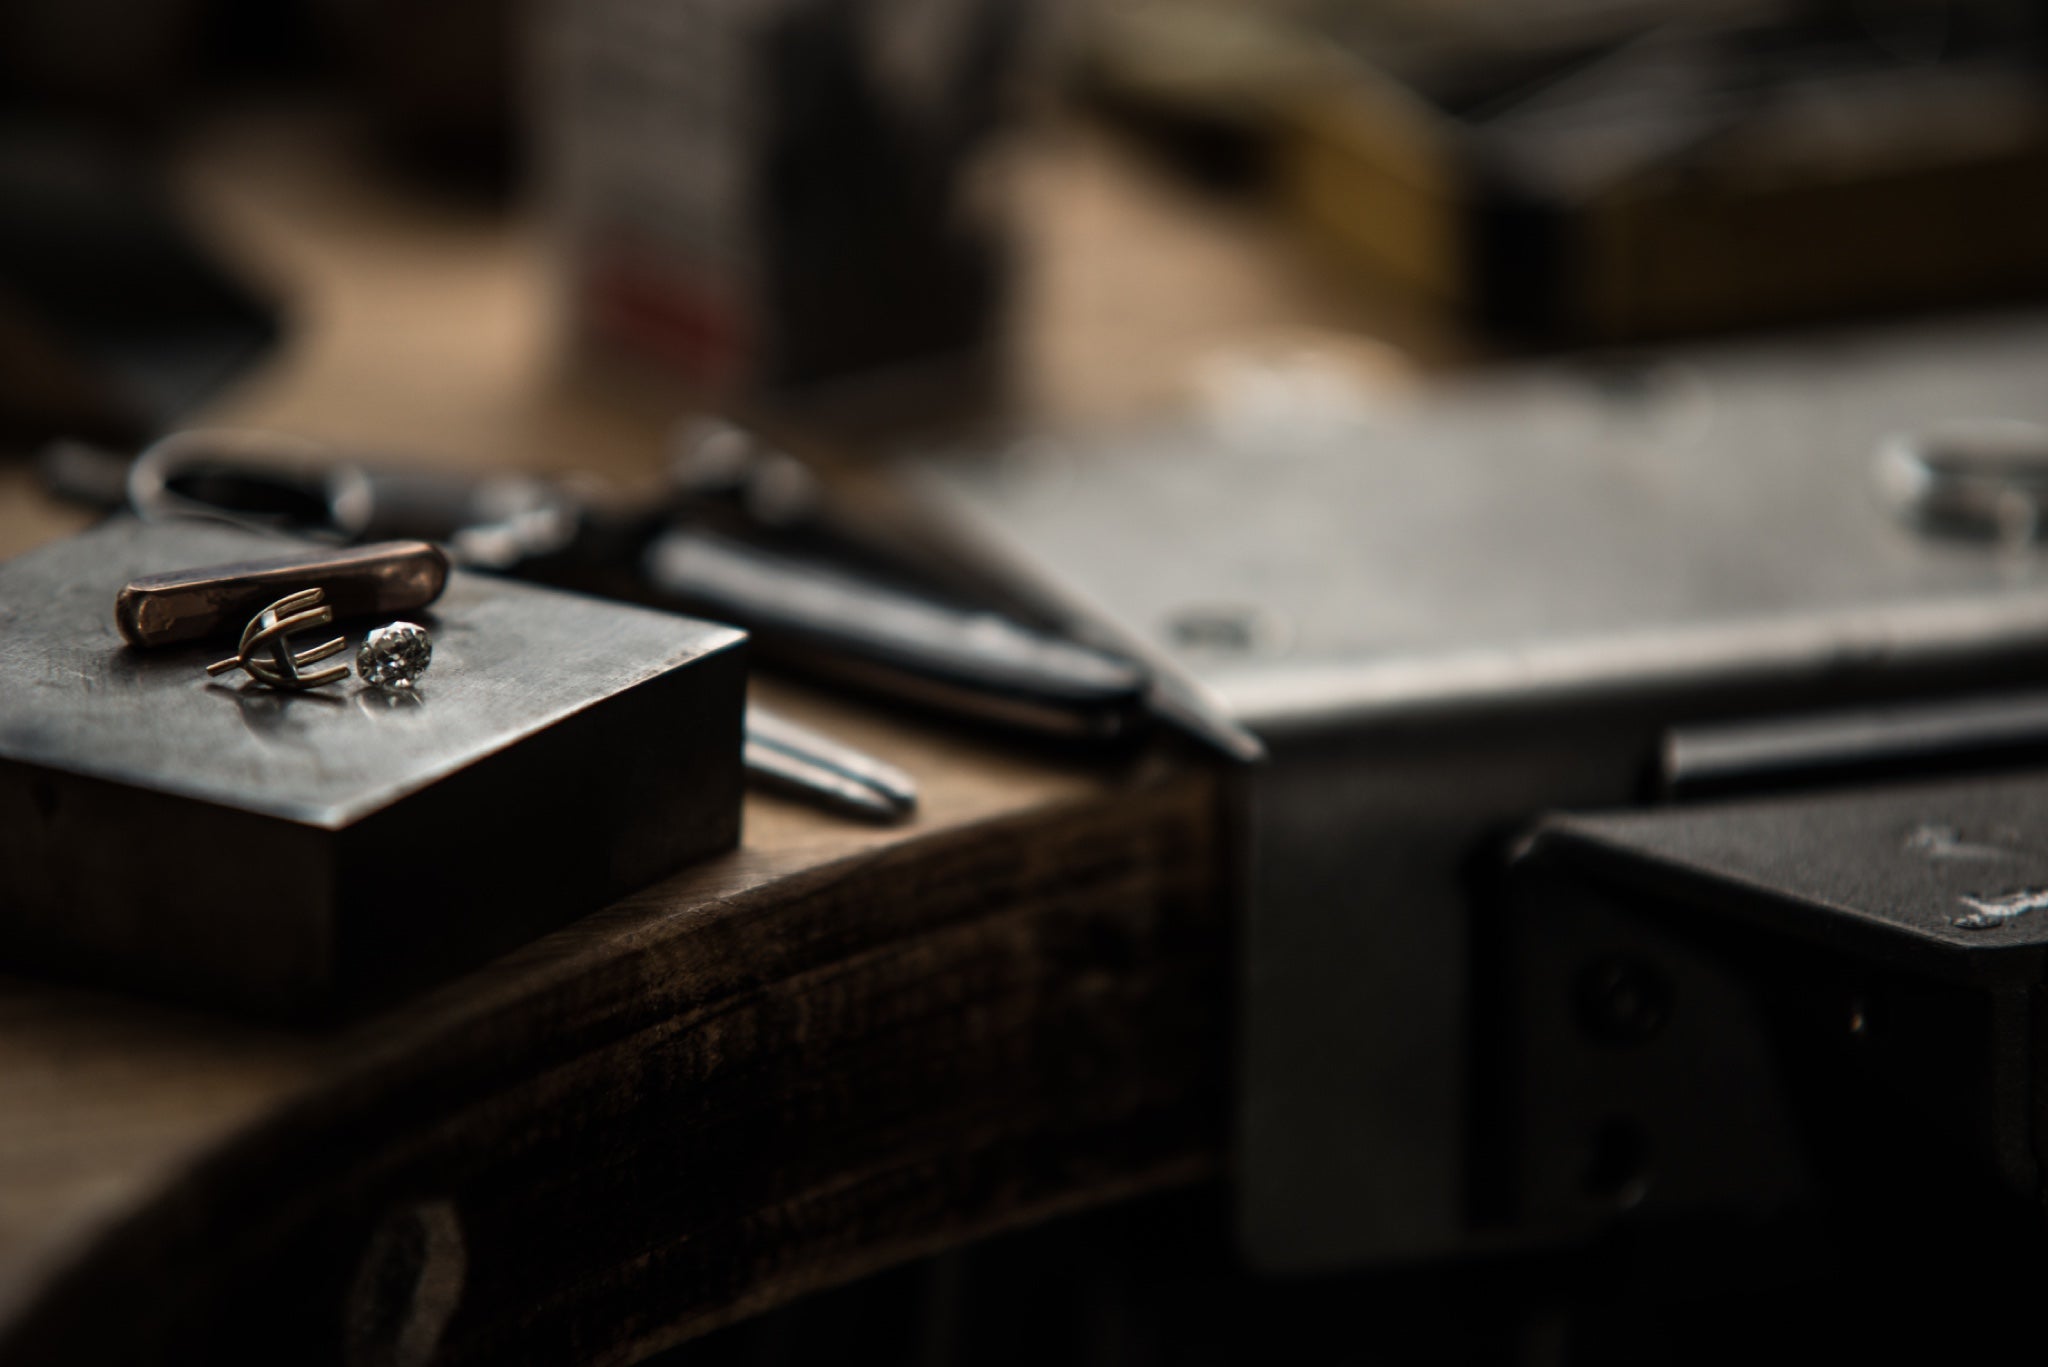 Bespoke diamond engagement ring on a workbench with the diamond waiting to be set